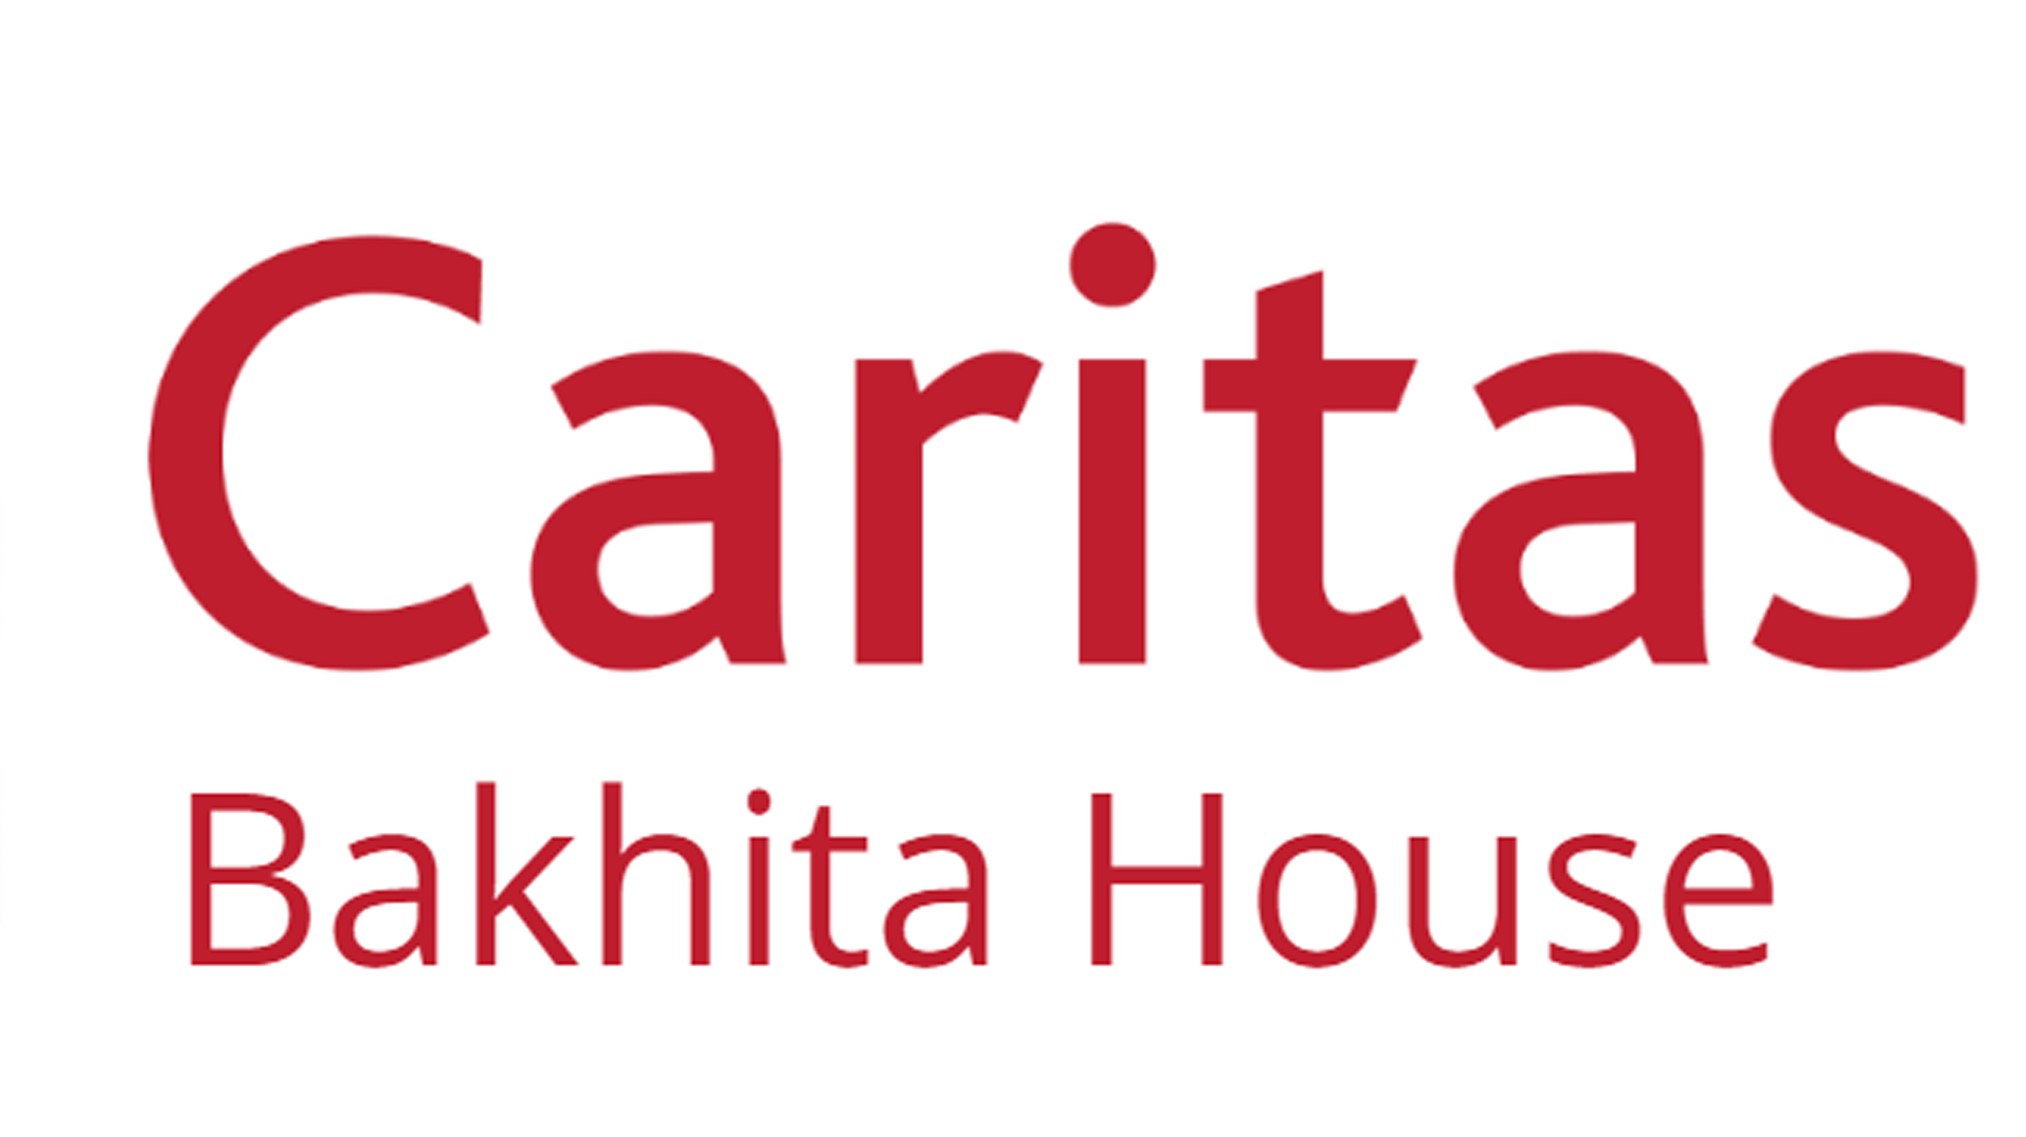 Caritas Bakhita House calls upon government for a tailored response to rough sleeping that recognises the complexities of women’s experiences 